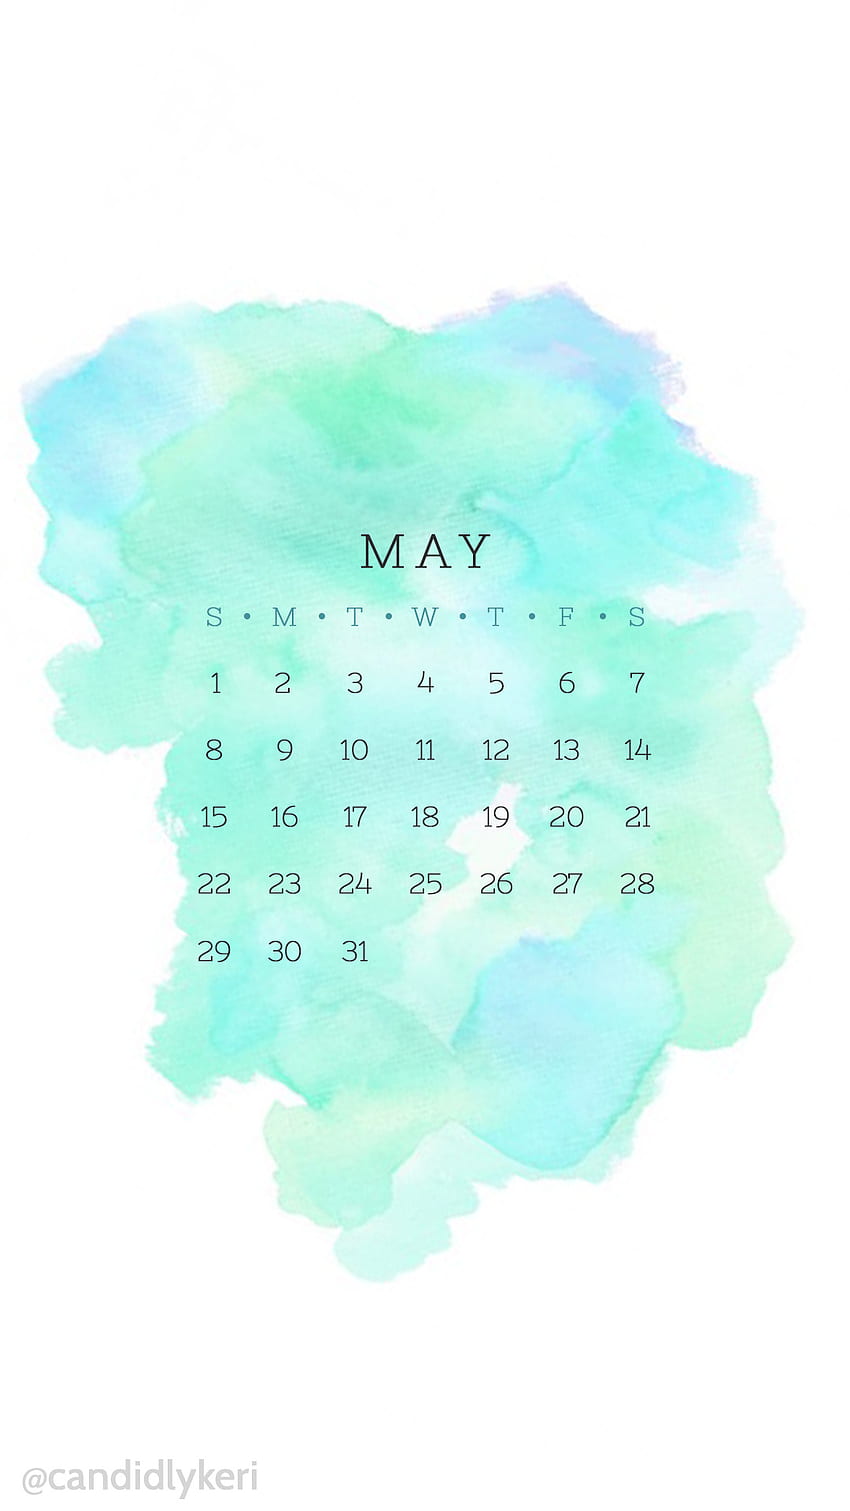 Blue turquoise and green may 2016 calendar for iPhone android or background HD phone wallpaper